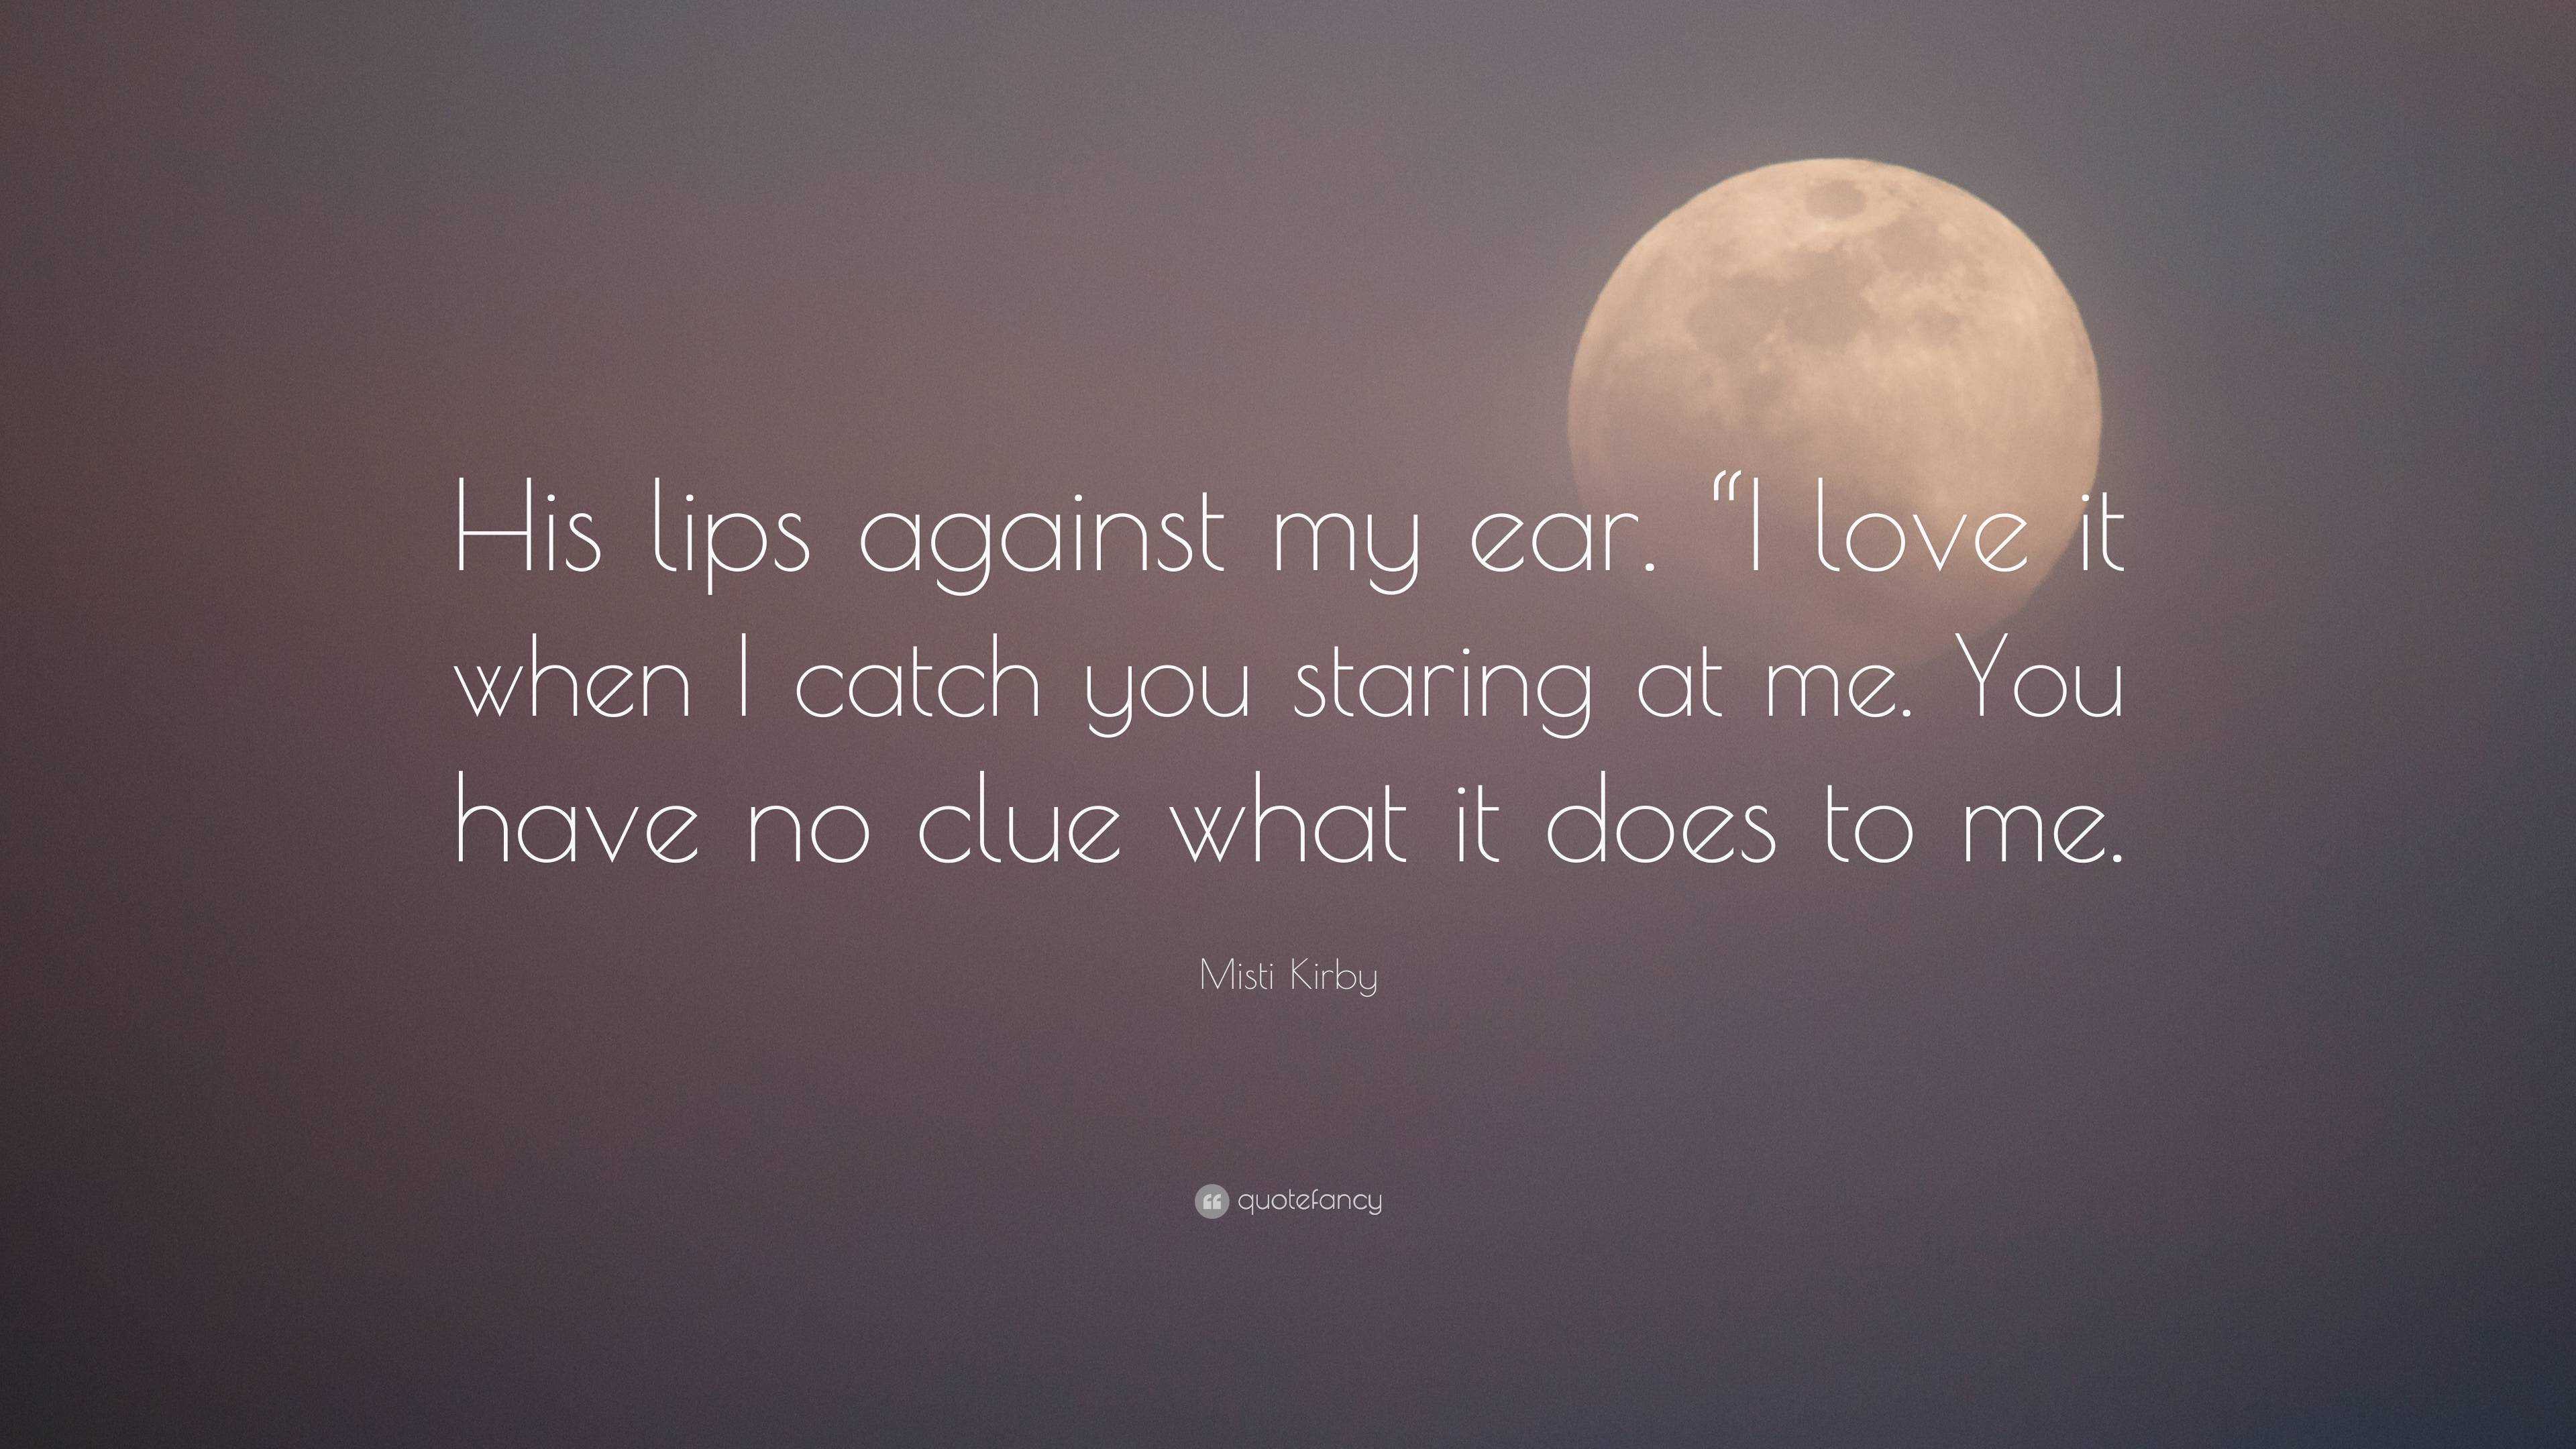 Misti Kirby Quote: “His lips against my ear. “I love it when I catch you  staring